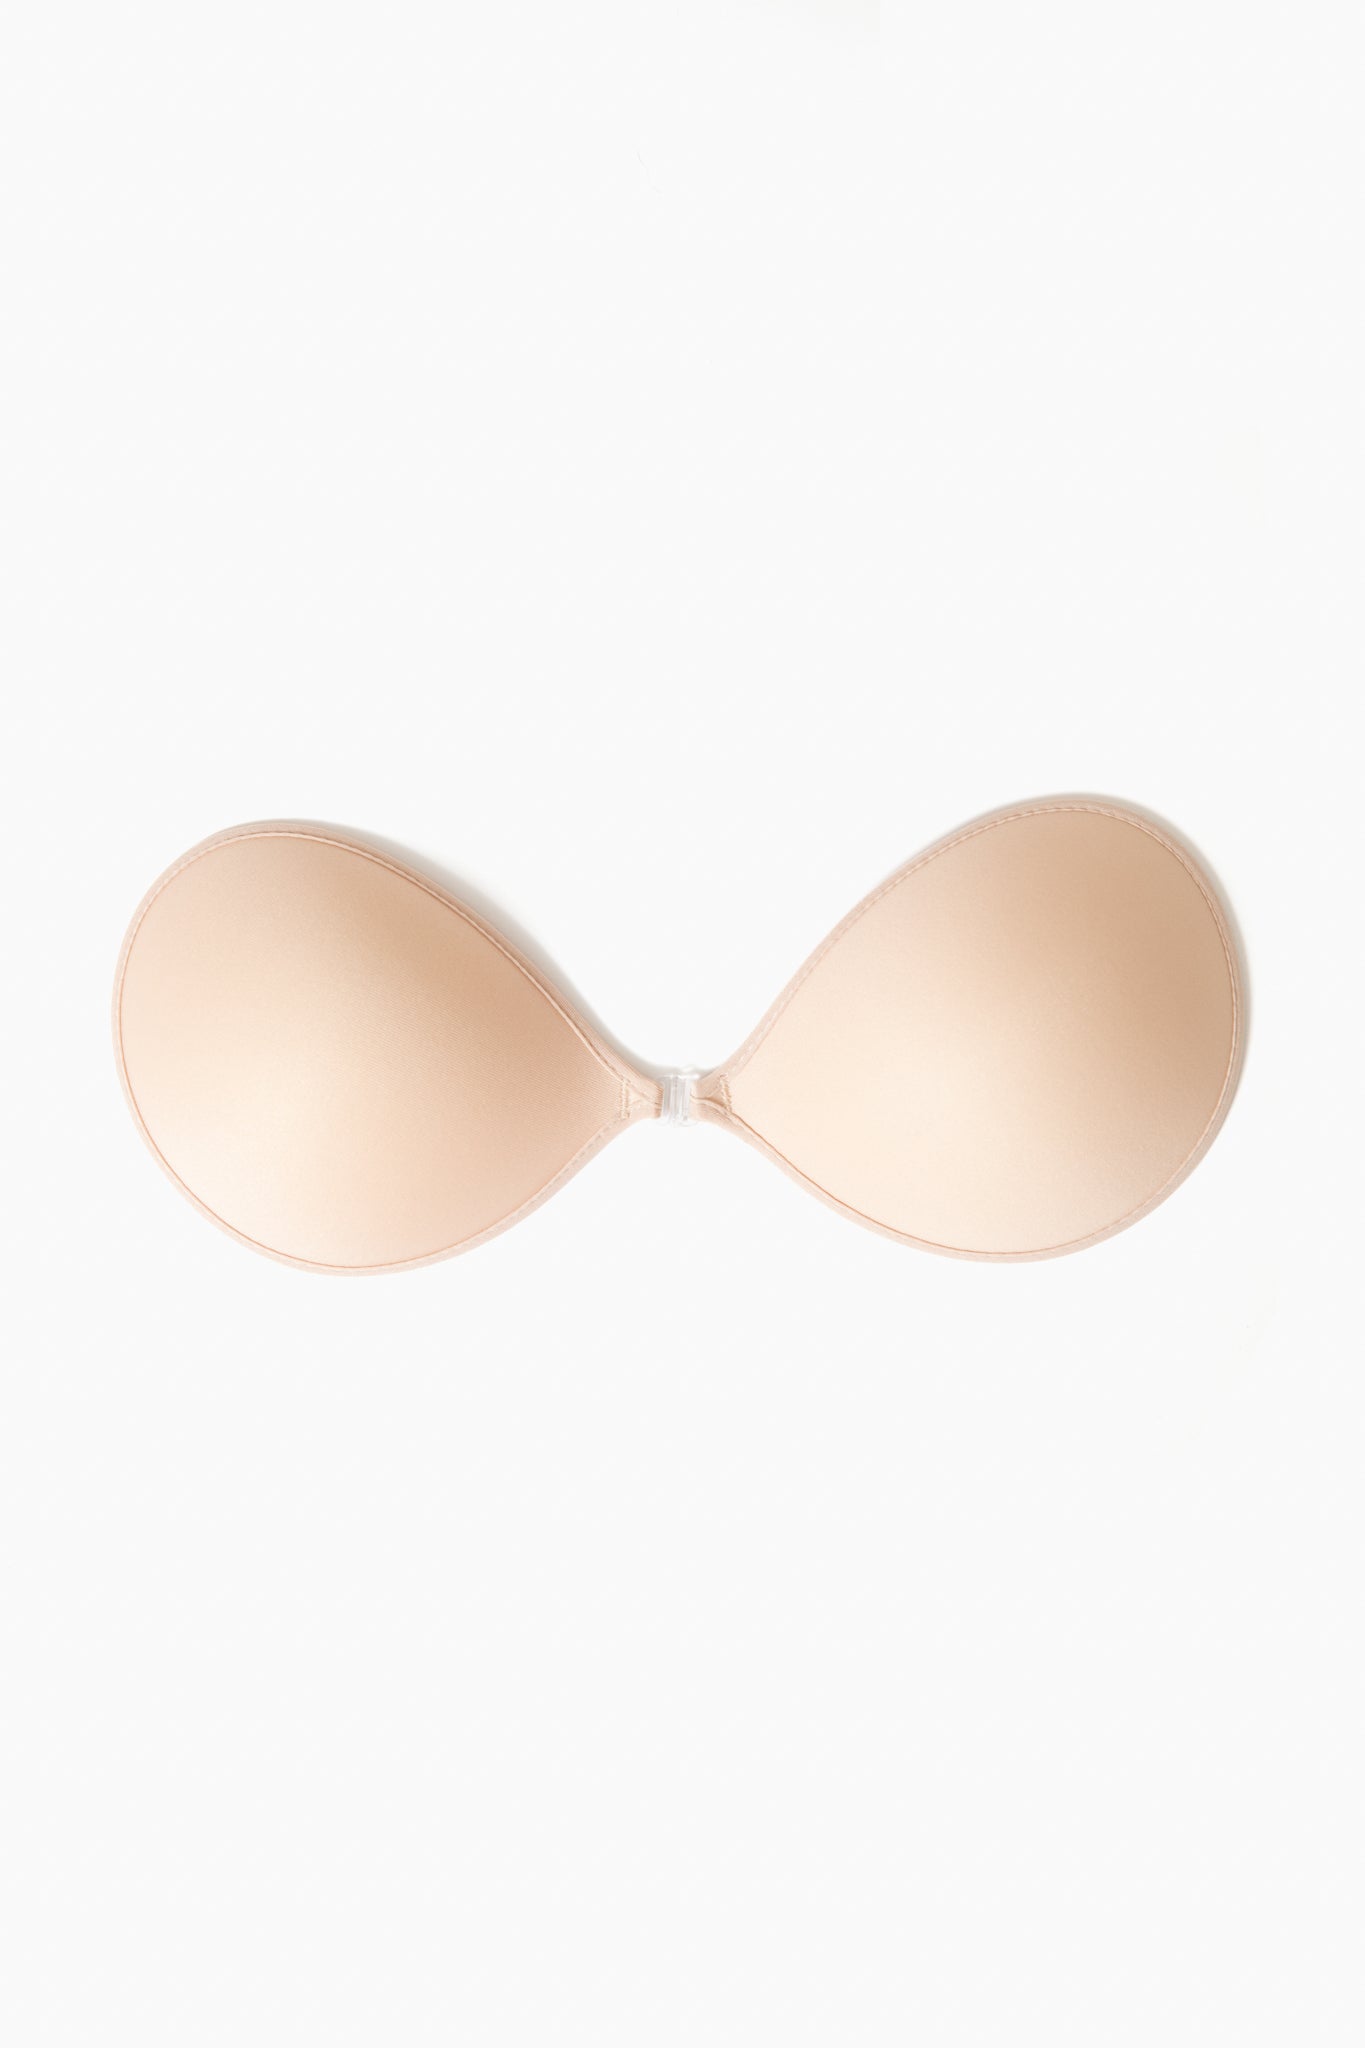 Backless Strapless adhesive bra by Feather lite Nu Bra